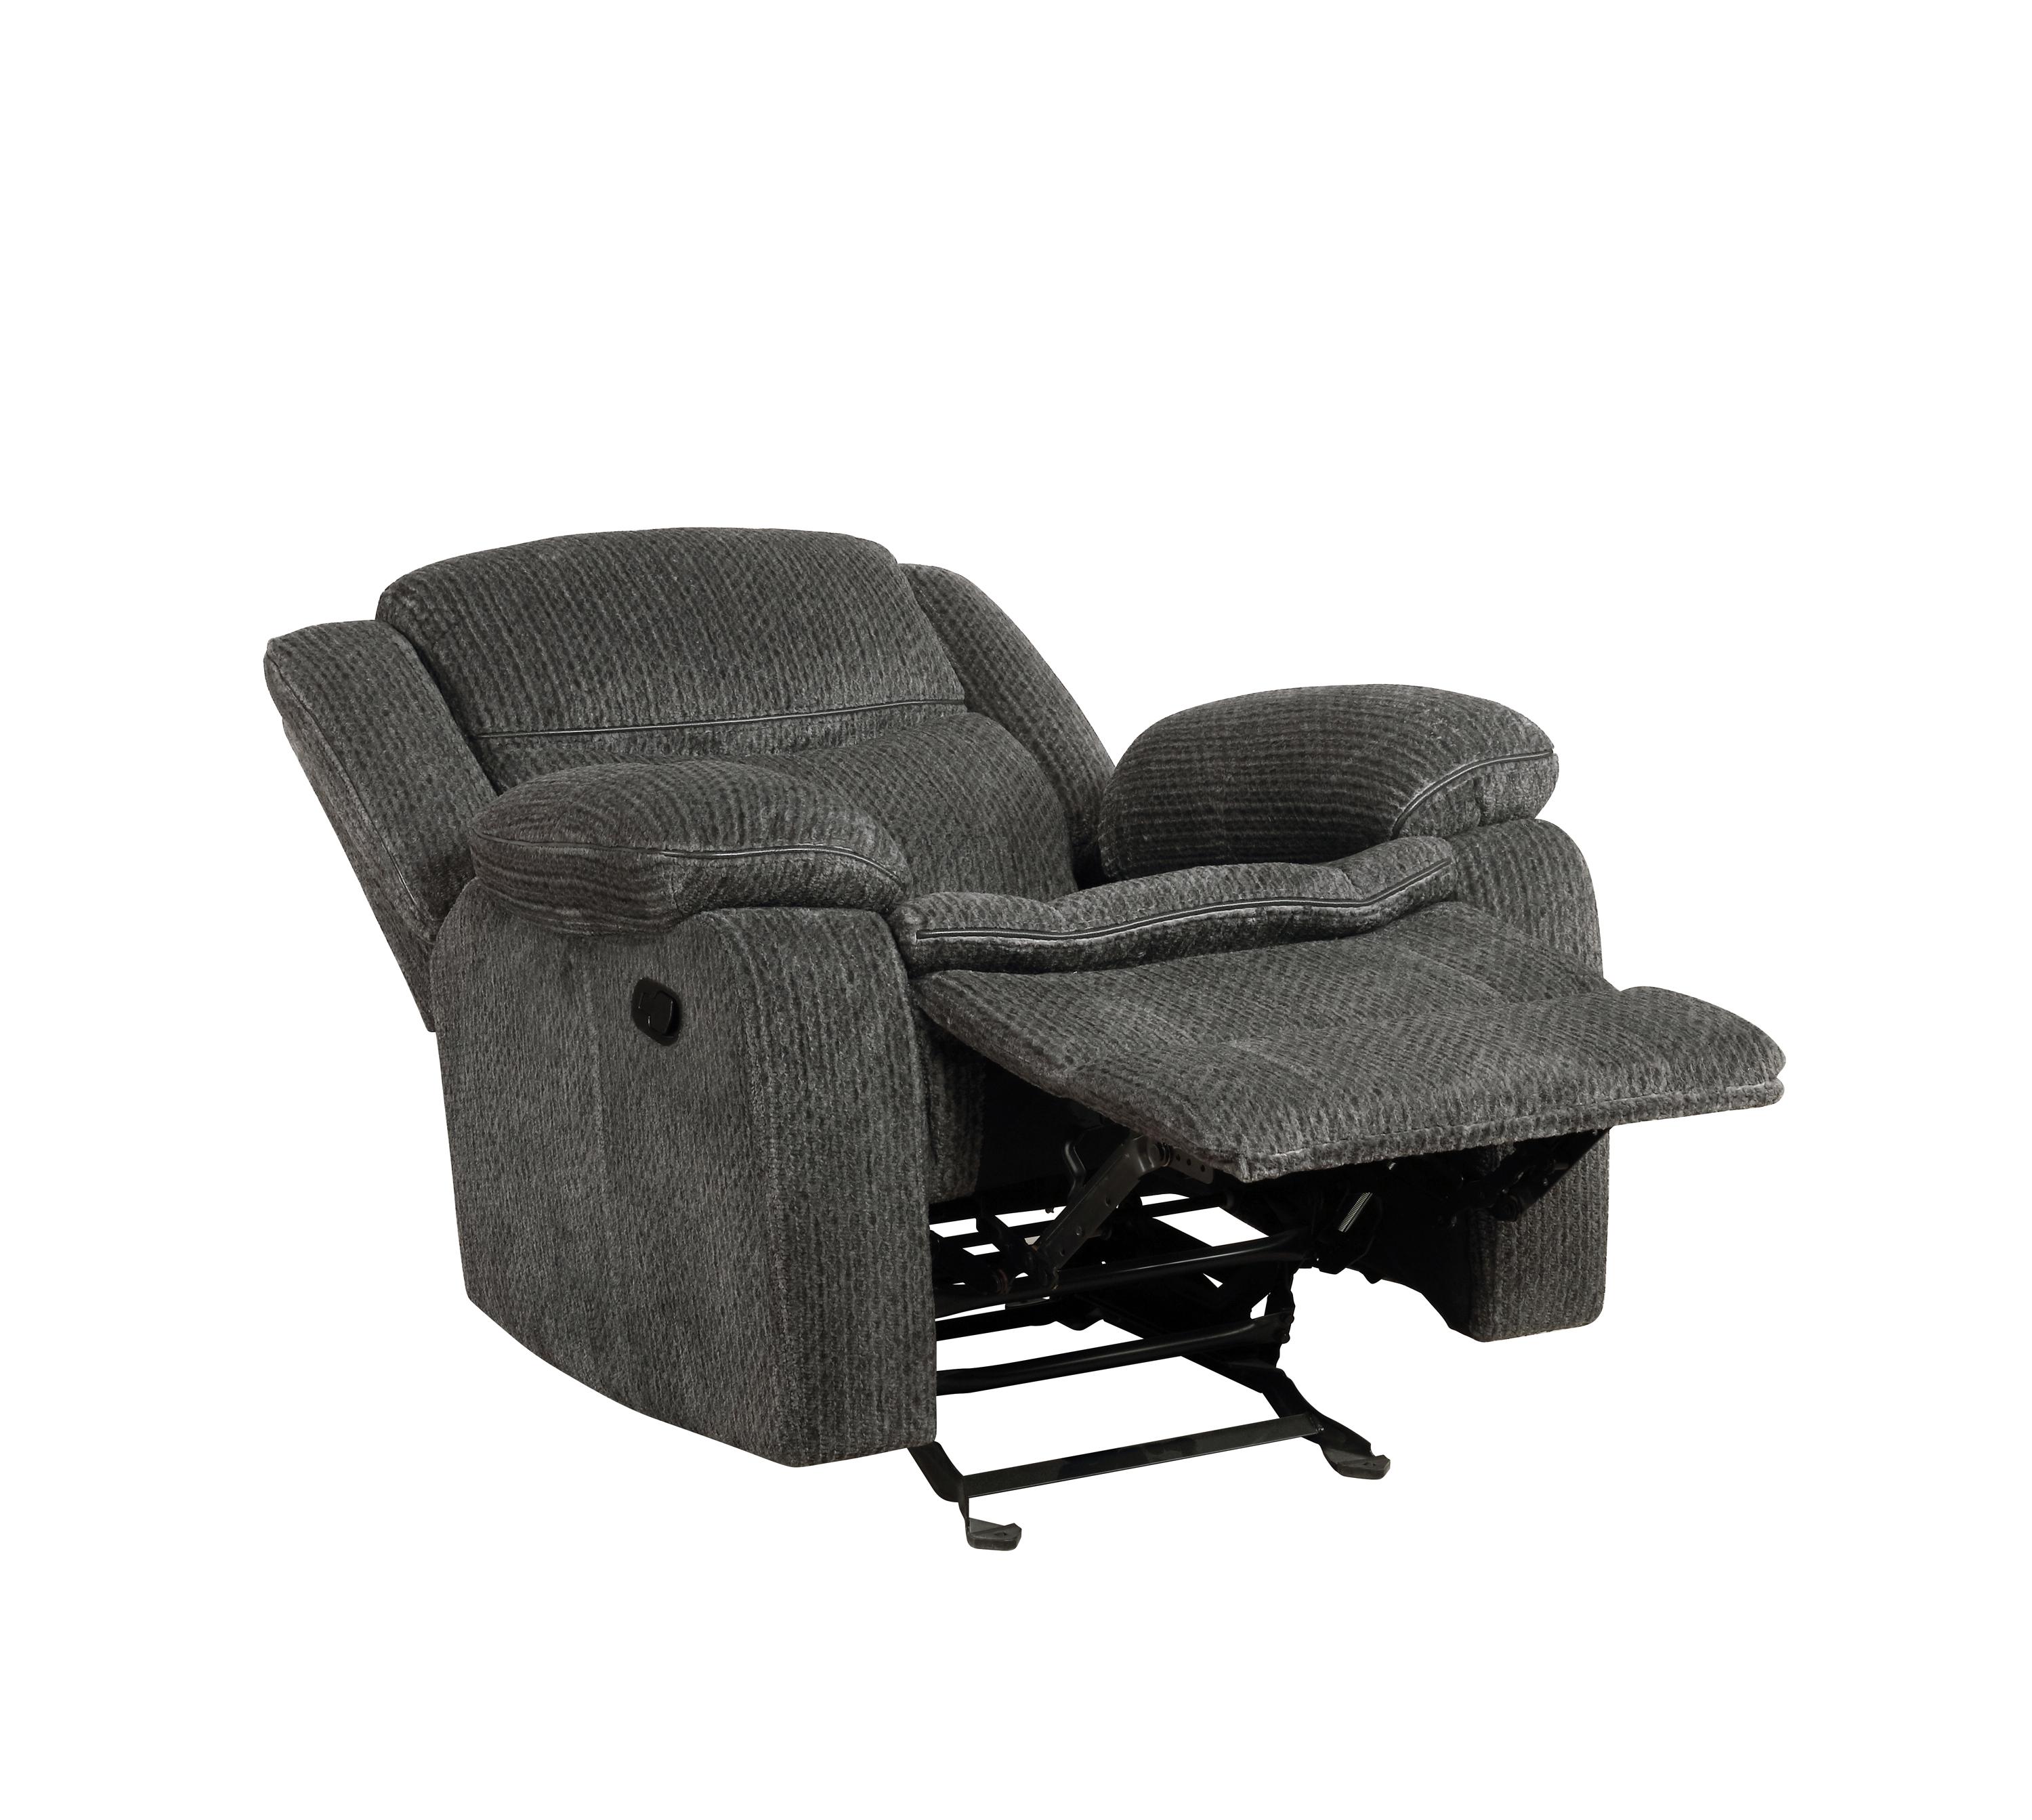 

    
Coaster 610256P Jennings Power glider recliner Charcoal 610256P
